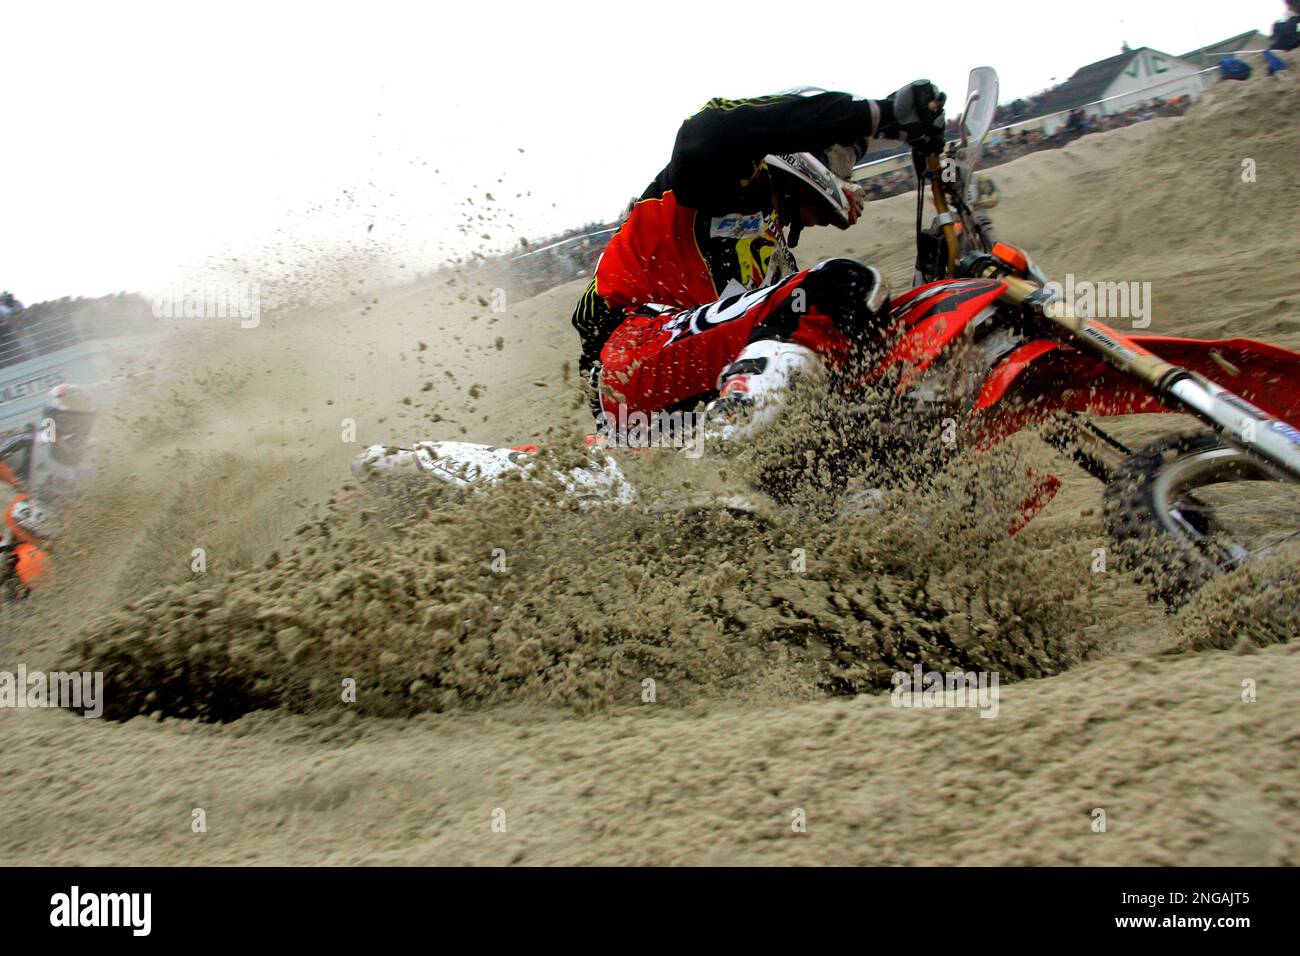 French driver Y. Morel drive at the start of the first Enduropale, formerly  known as Enduro du Touquet, motorcycling race Sunday, Feb. 5, 2006, on the  Cote d'Opale coastline in Le Touquet,